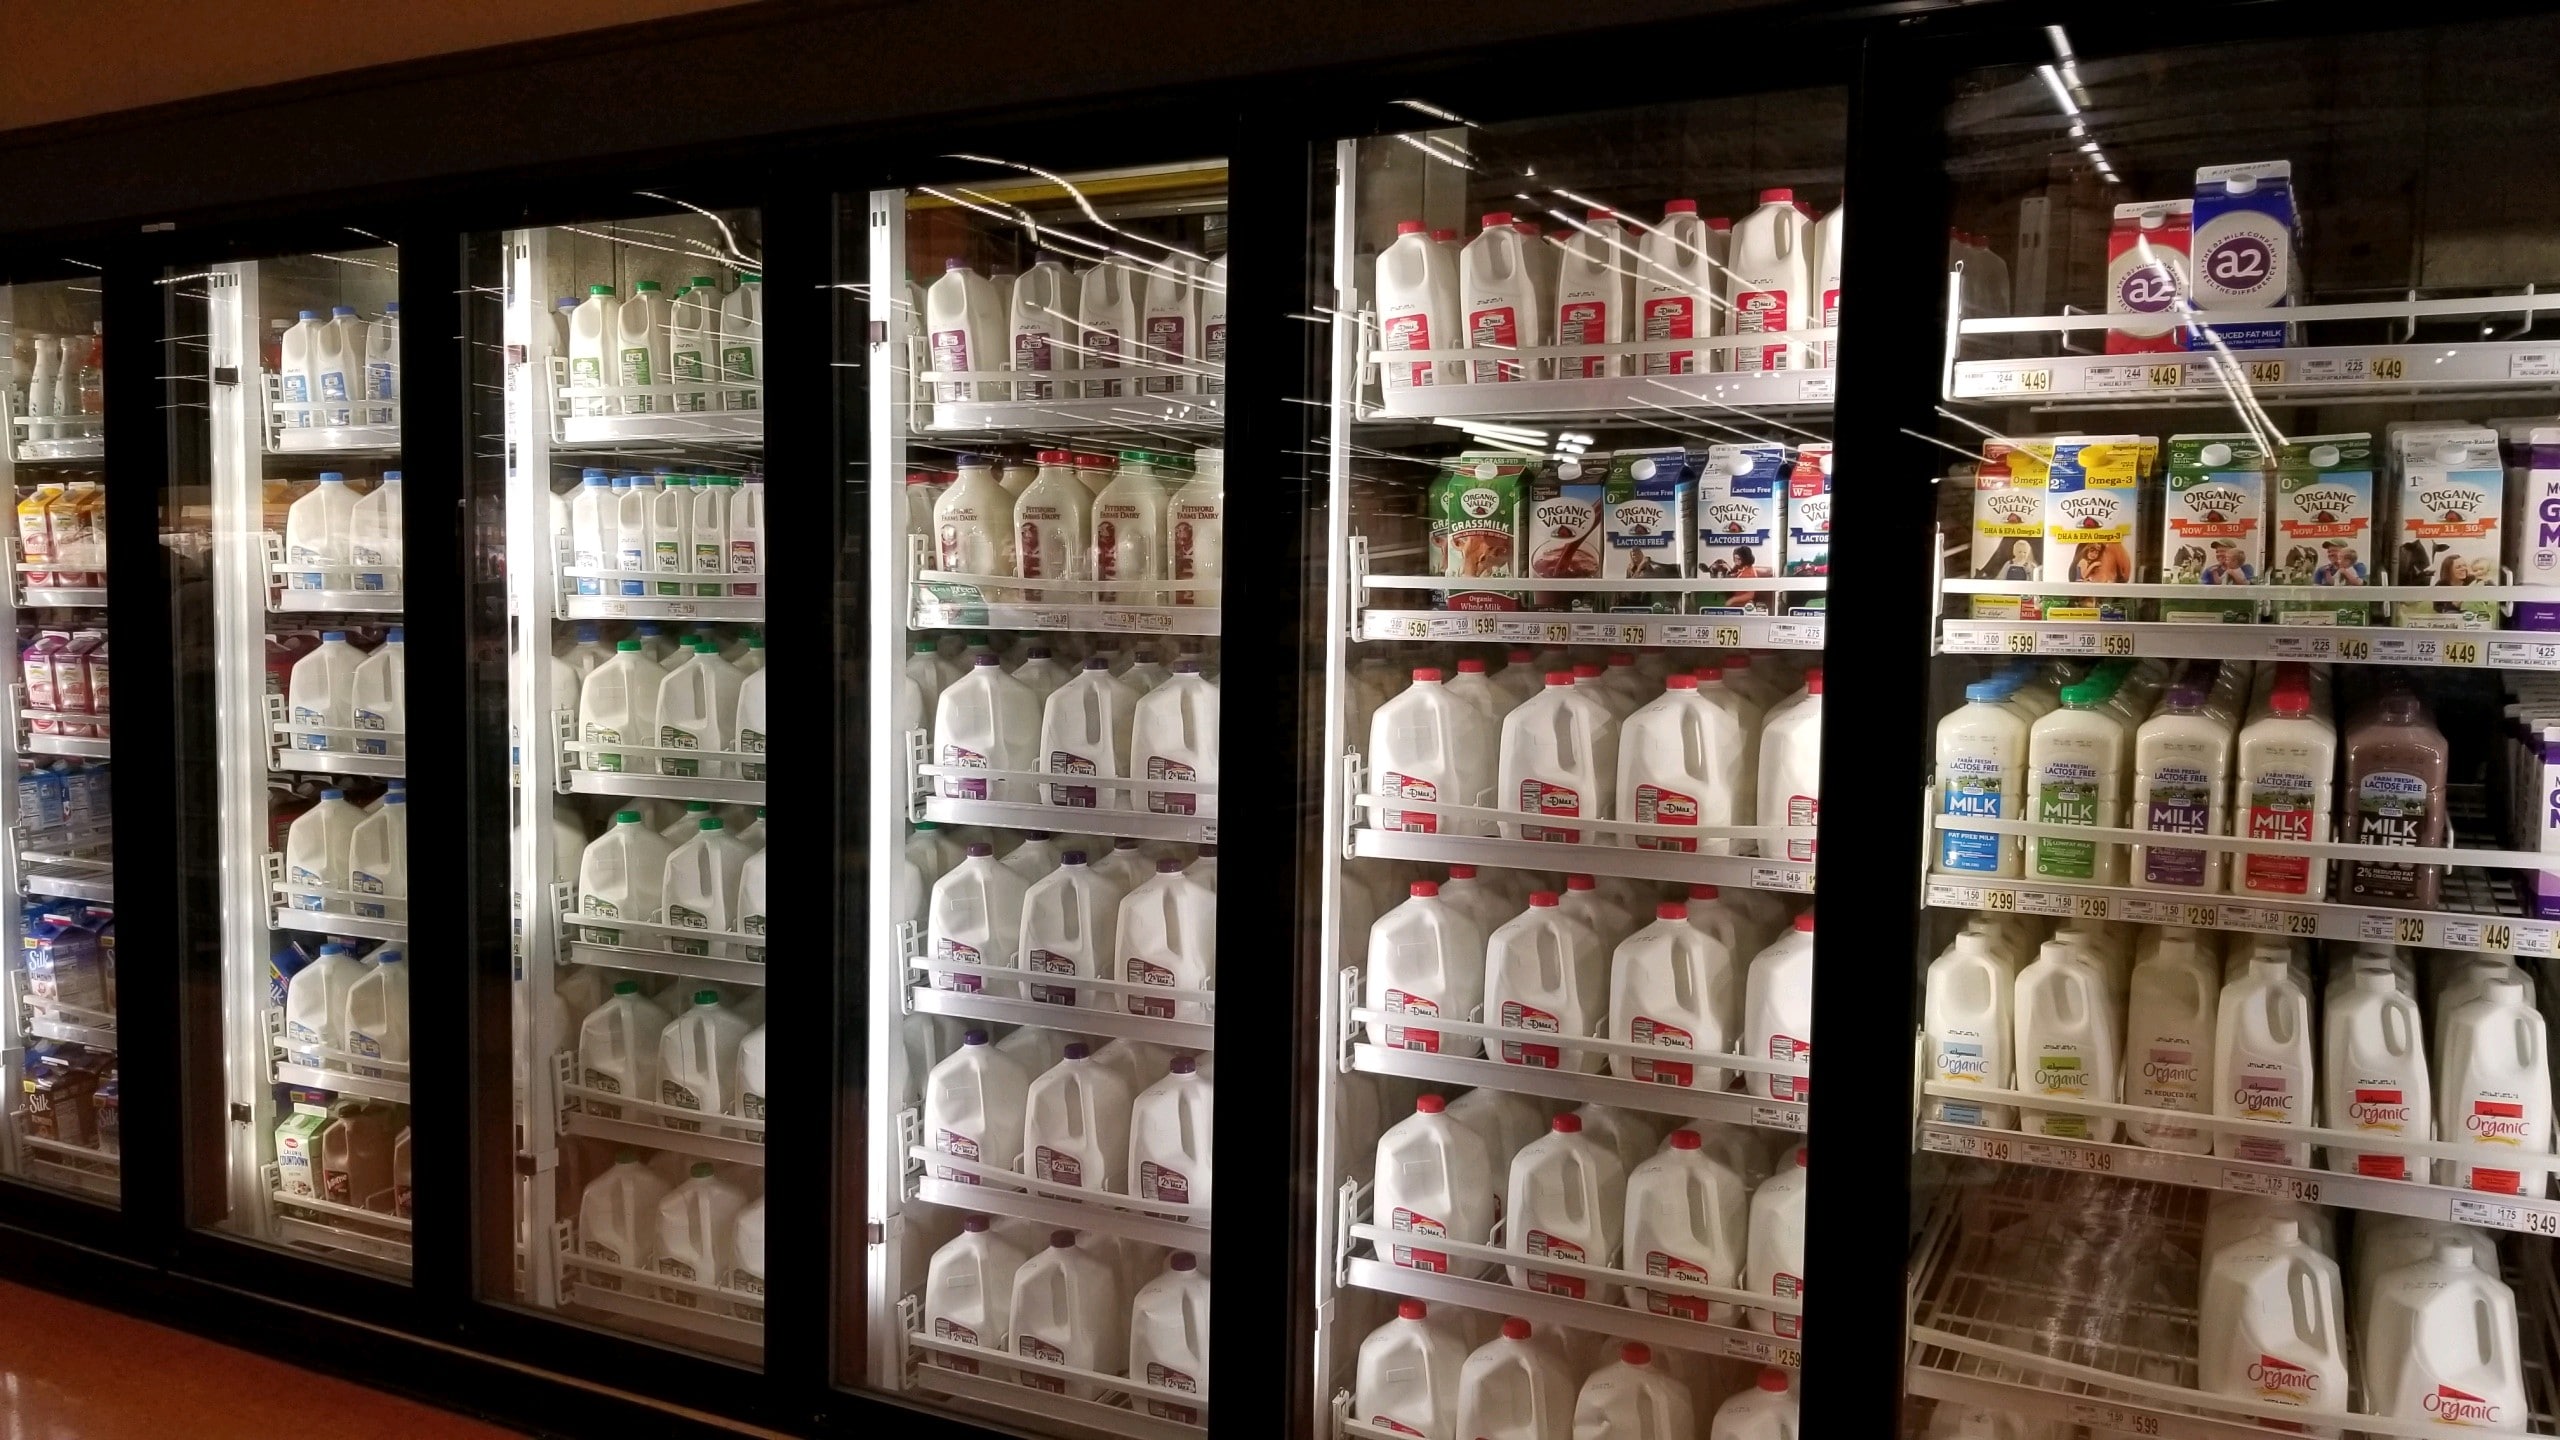 ADA North East Retail Team Helps Grocery Stores Stock More than 100,000 Units of Dairy